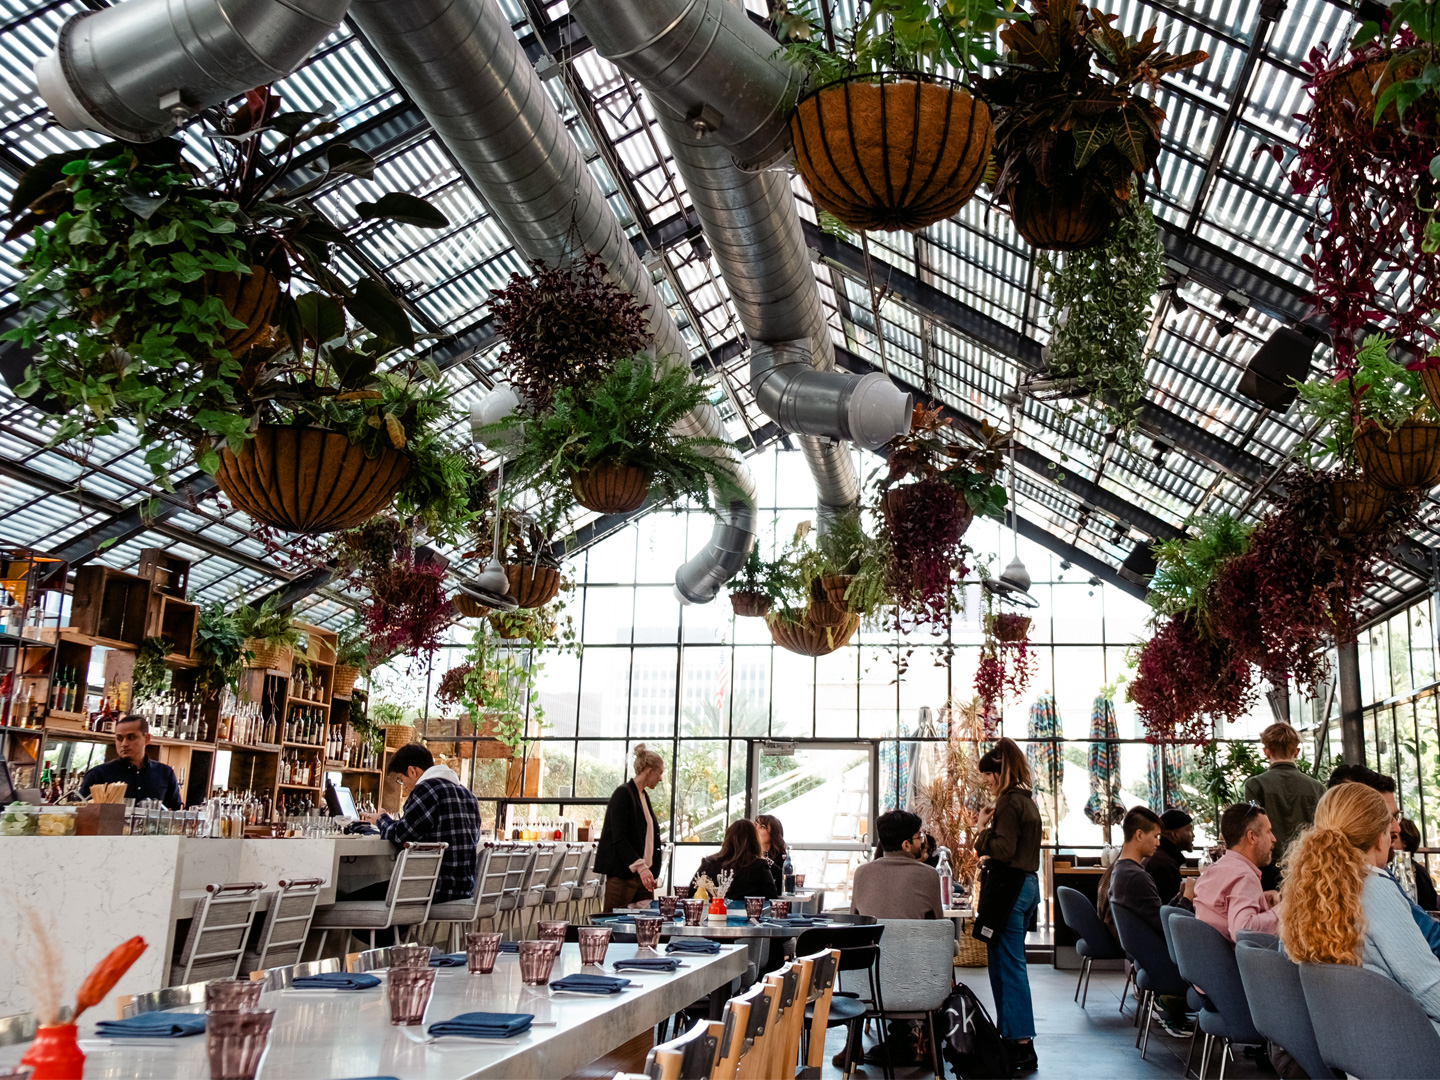 Photo of an indoor restaurant at the LINE hotel with an atrium style roof and hanging plants